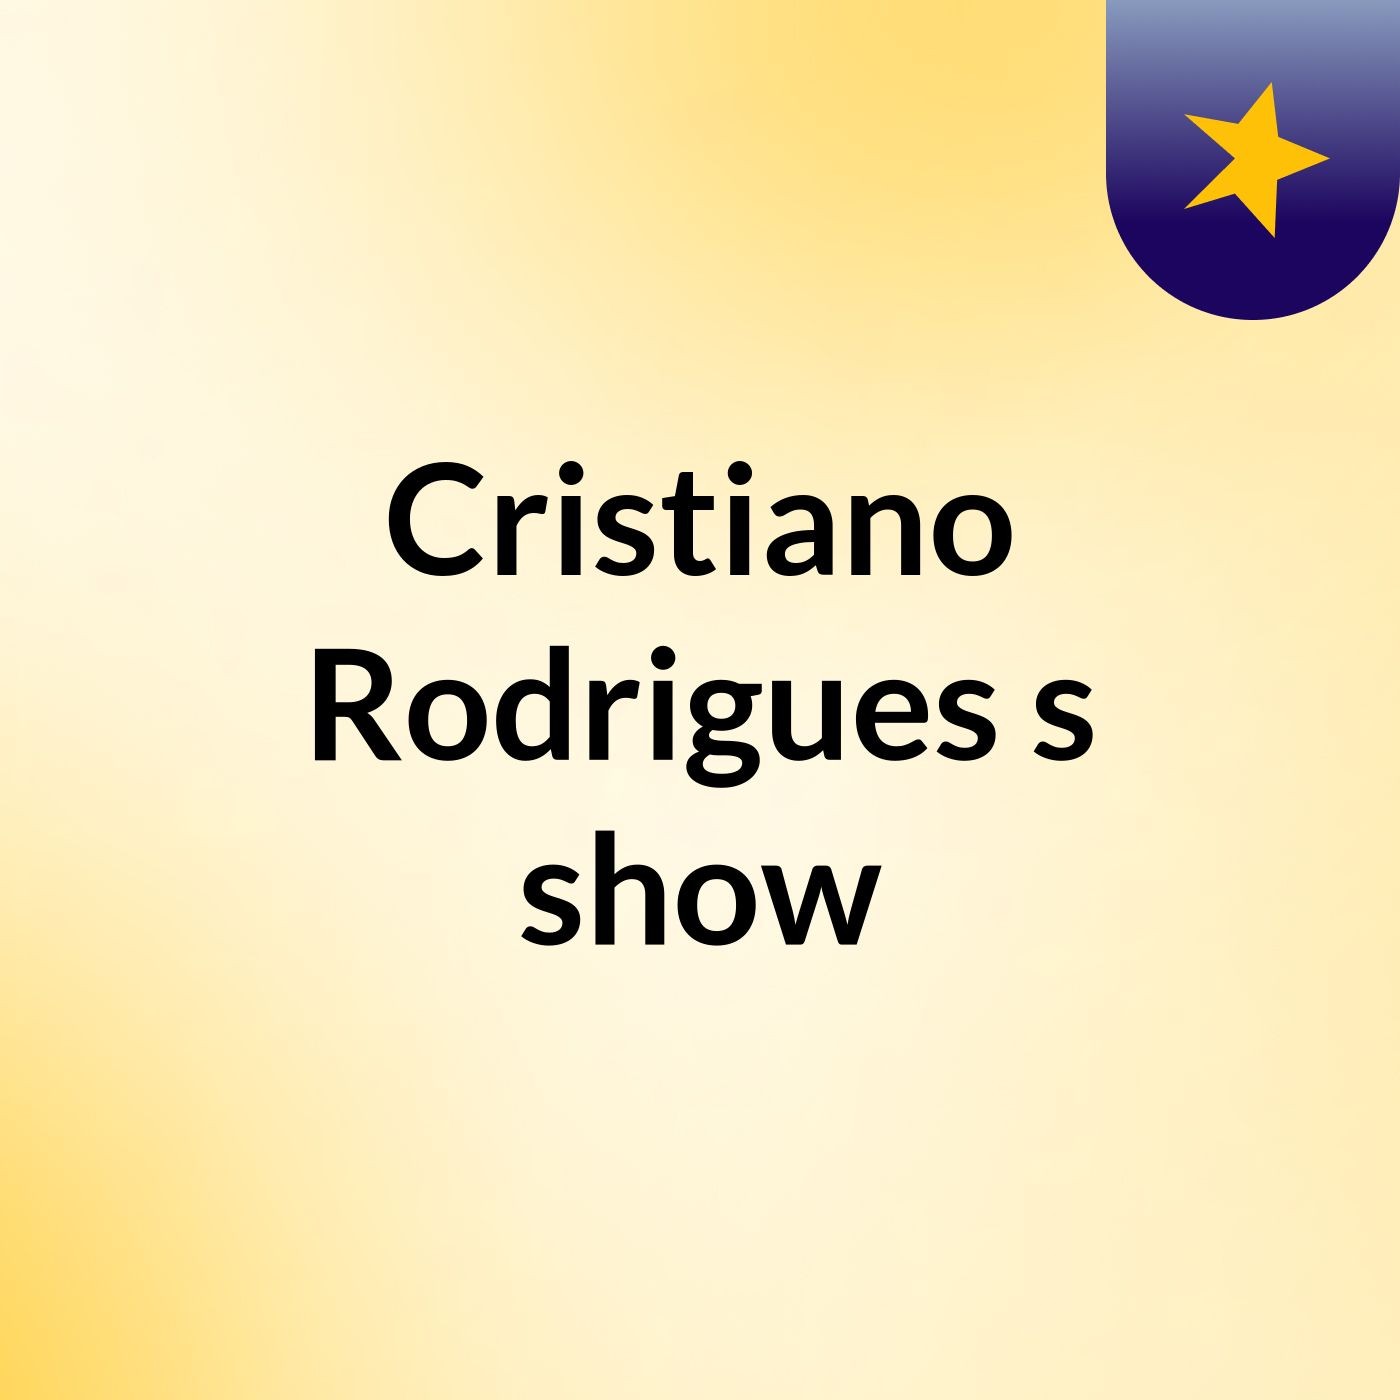 Cristiano Rodrigues's show